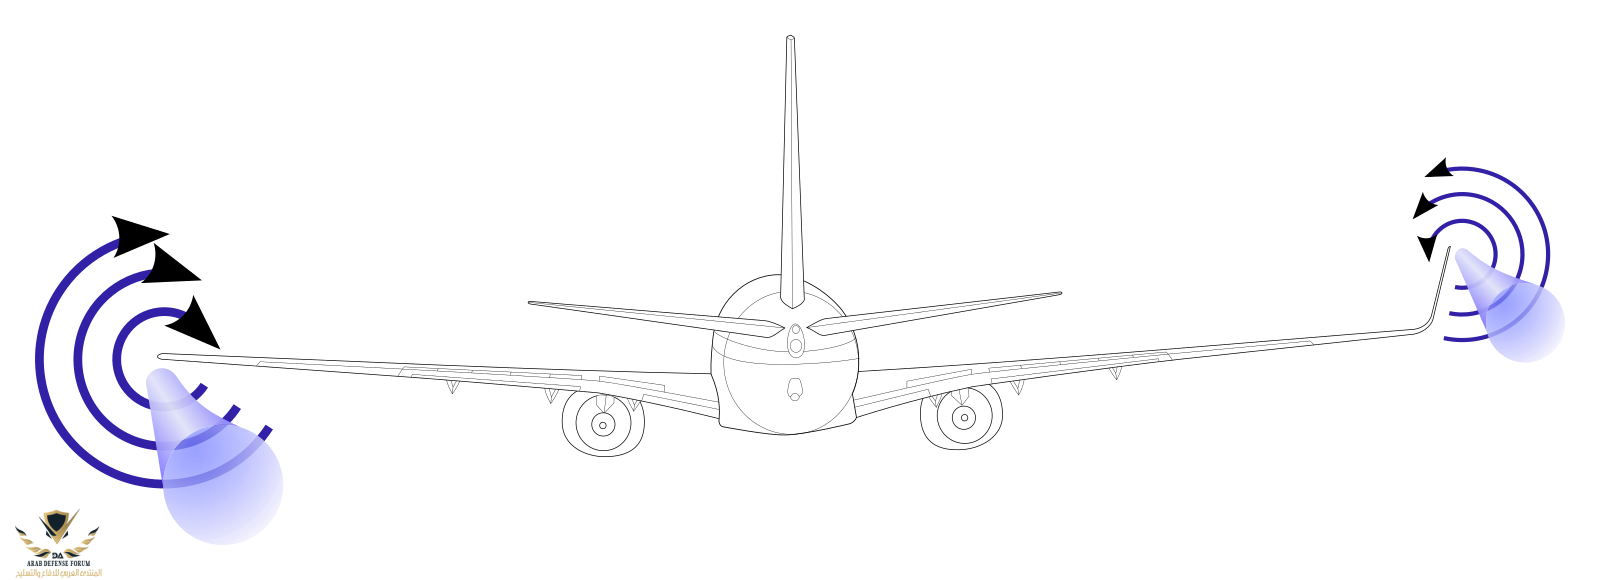 1600px-737-NG_winglet_effect_(simplified).svg.png